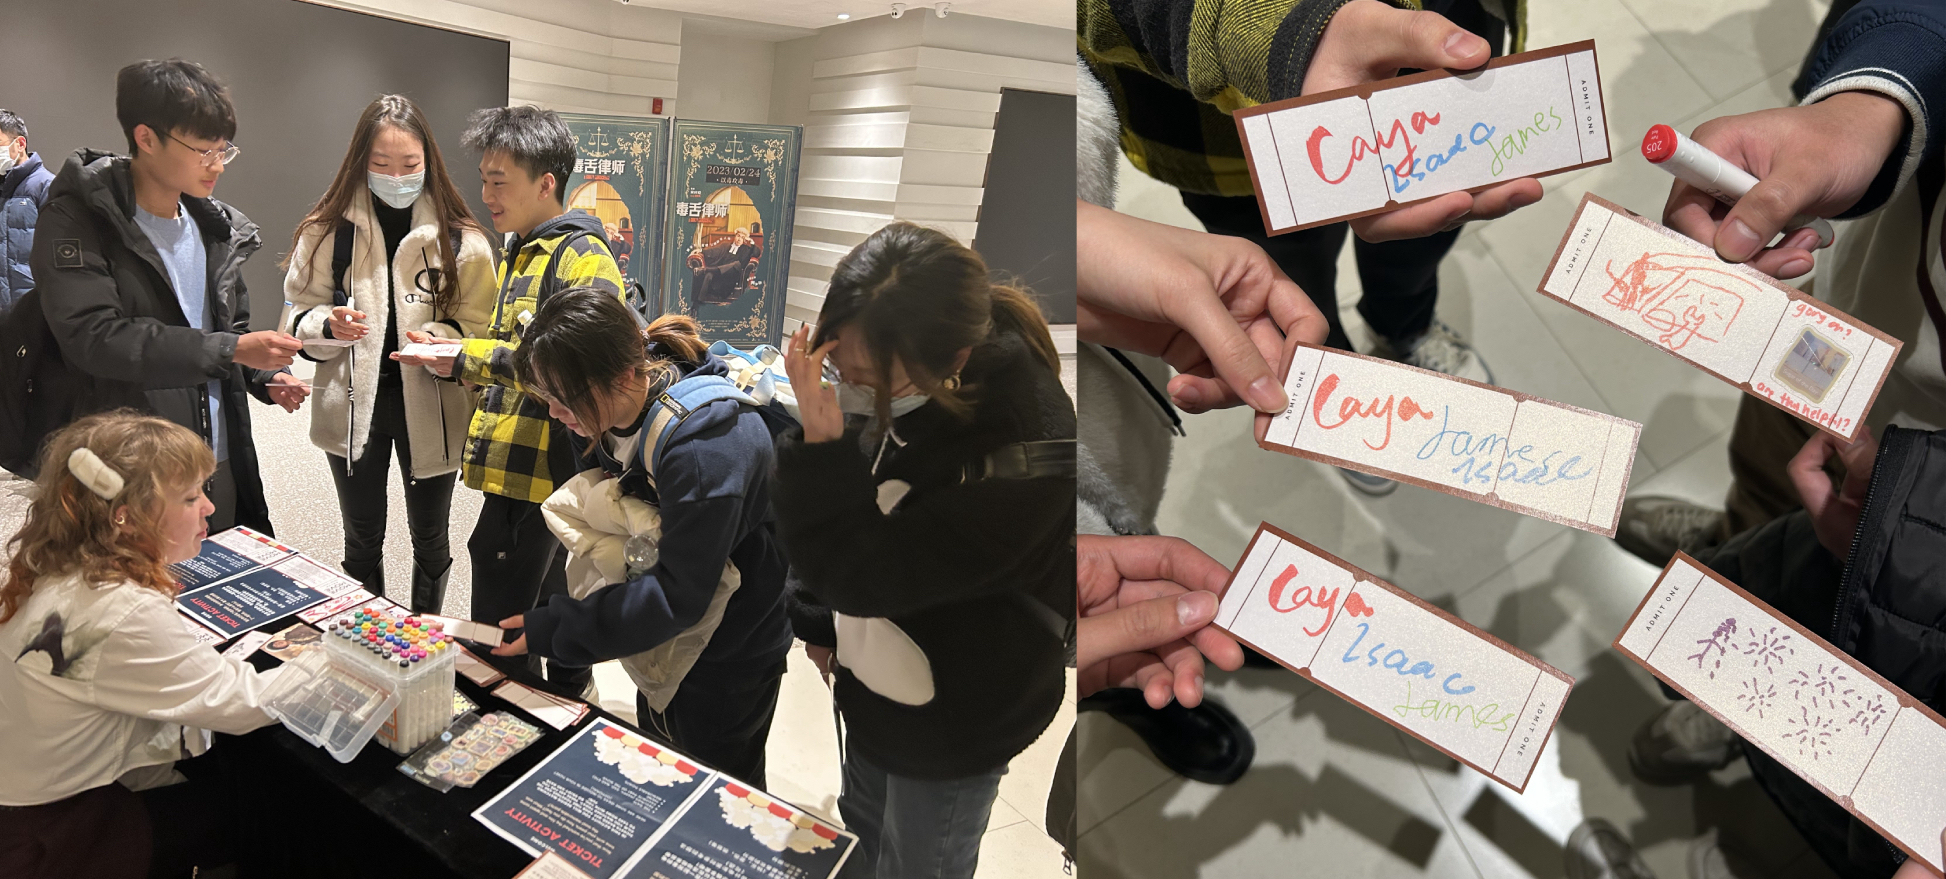 Left image: Students collect tickets from a table for an activity. Right image: Following the activity, students display their tickets, on which they have signed their names and created drawings (including fireworks, and a person in a car)